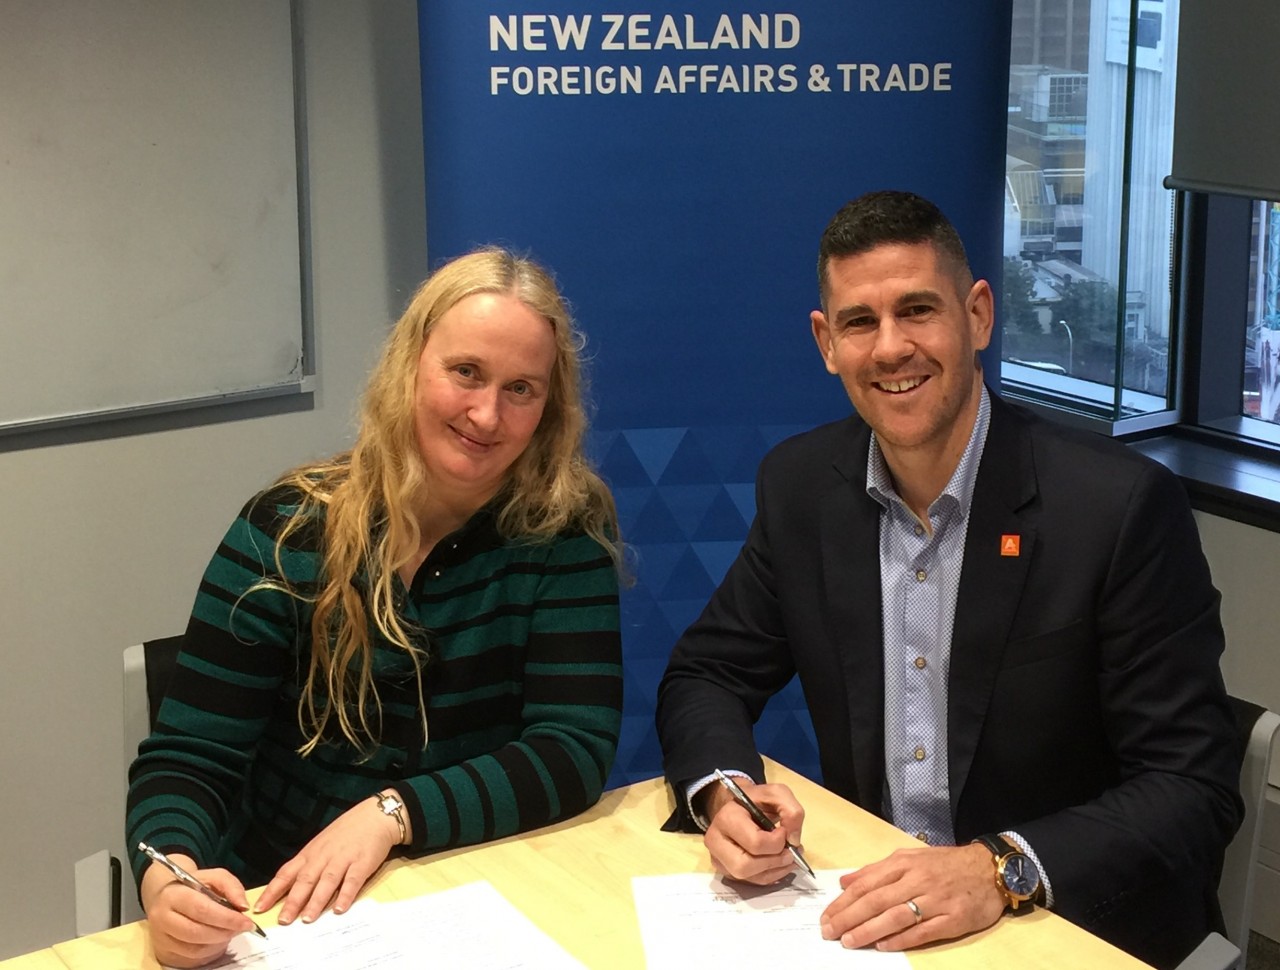 Andrea Smith, Deputy Secretary, APEC 2021 Programme, Ministry of Foreign Affairs and Trade, and Steve Armitage, General Manager Destination, Auckland Tourism Events & Economic Development (ATEED) signing the MoU